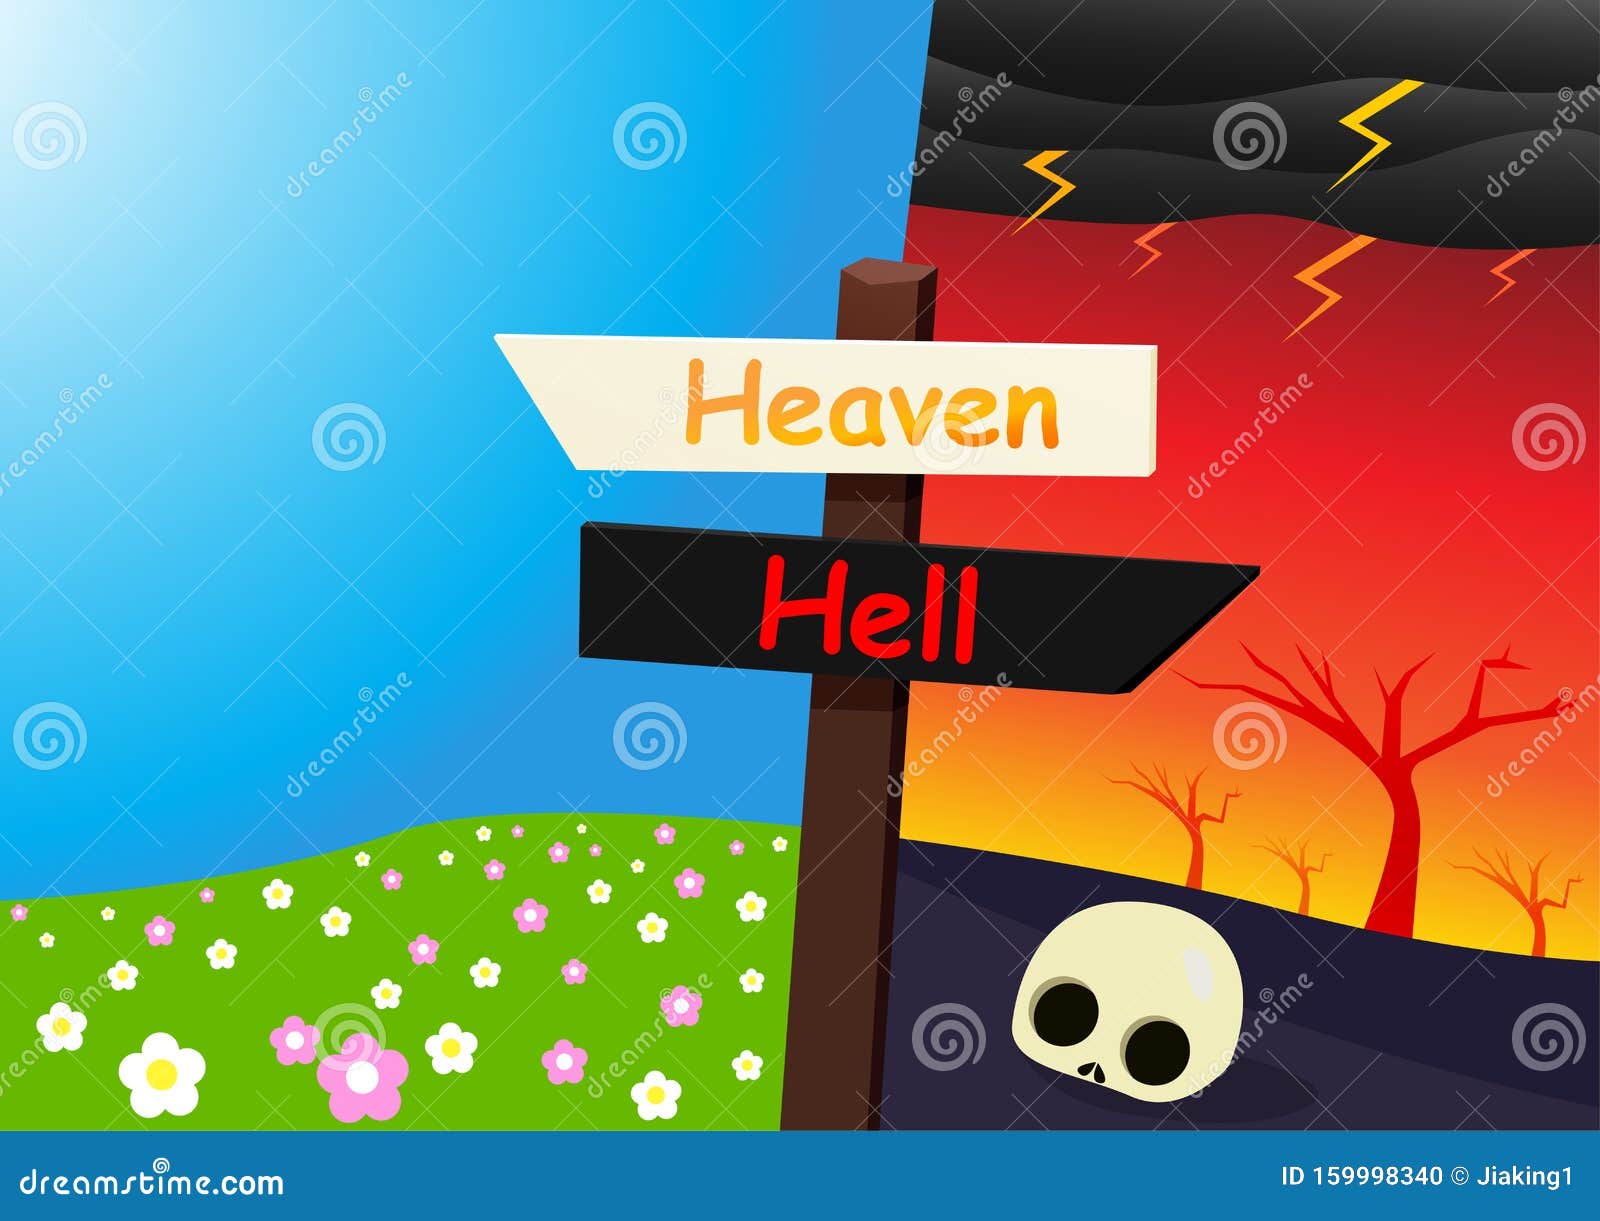 Heaven And Hell Landscape With Signpost Vector Art Stock Vector Illustration Of Hell Bible